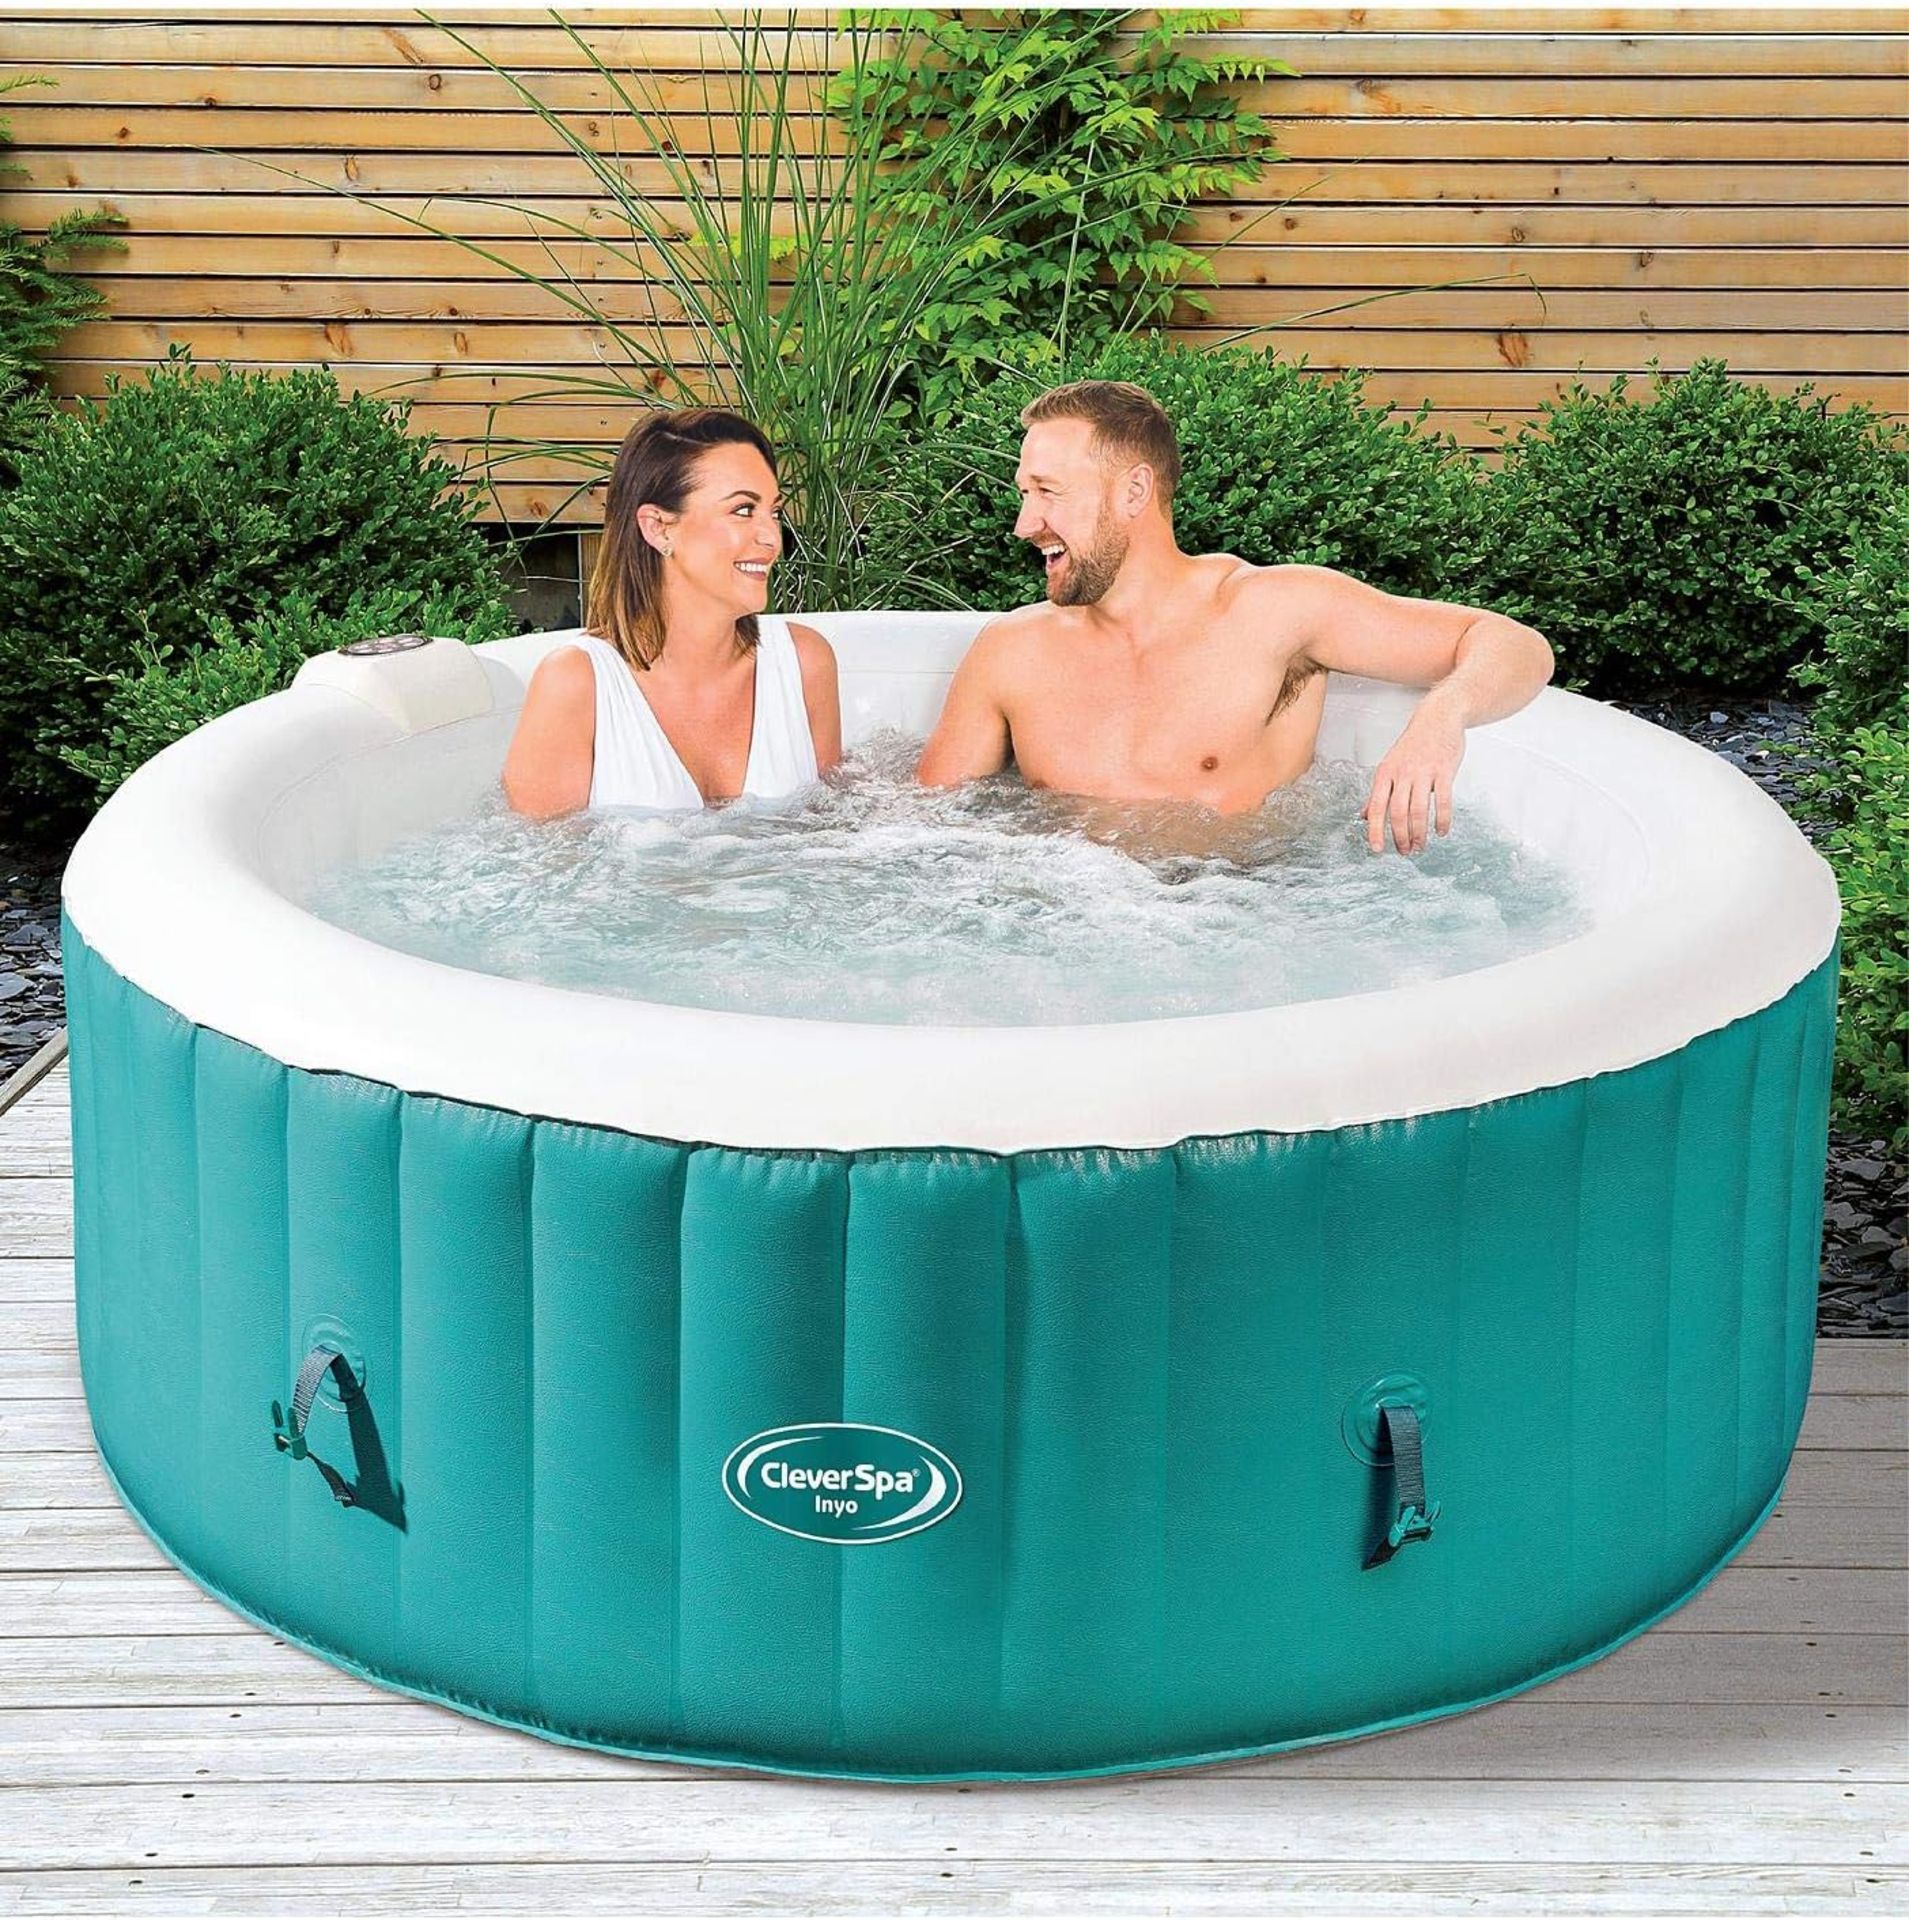 Pallet to Contain 8 x New & Boxed CleverSpa Inyo 4 Person Hot Tub. RRP £499.99 each. There is no - Image 2 of 5